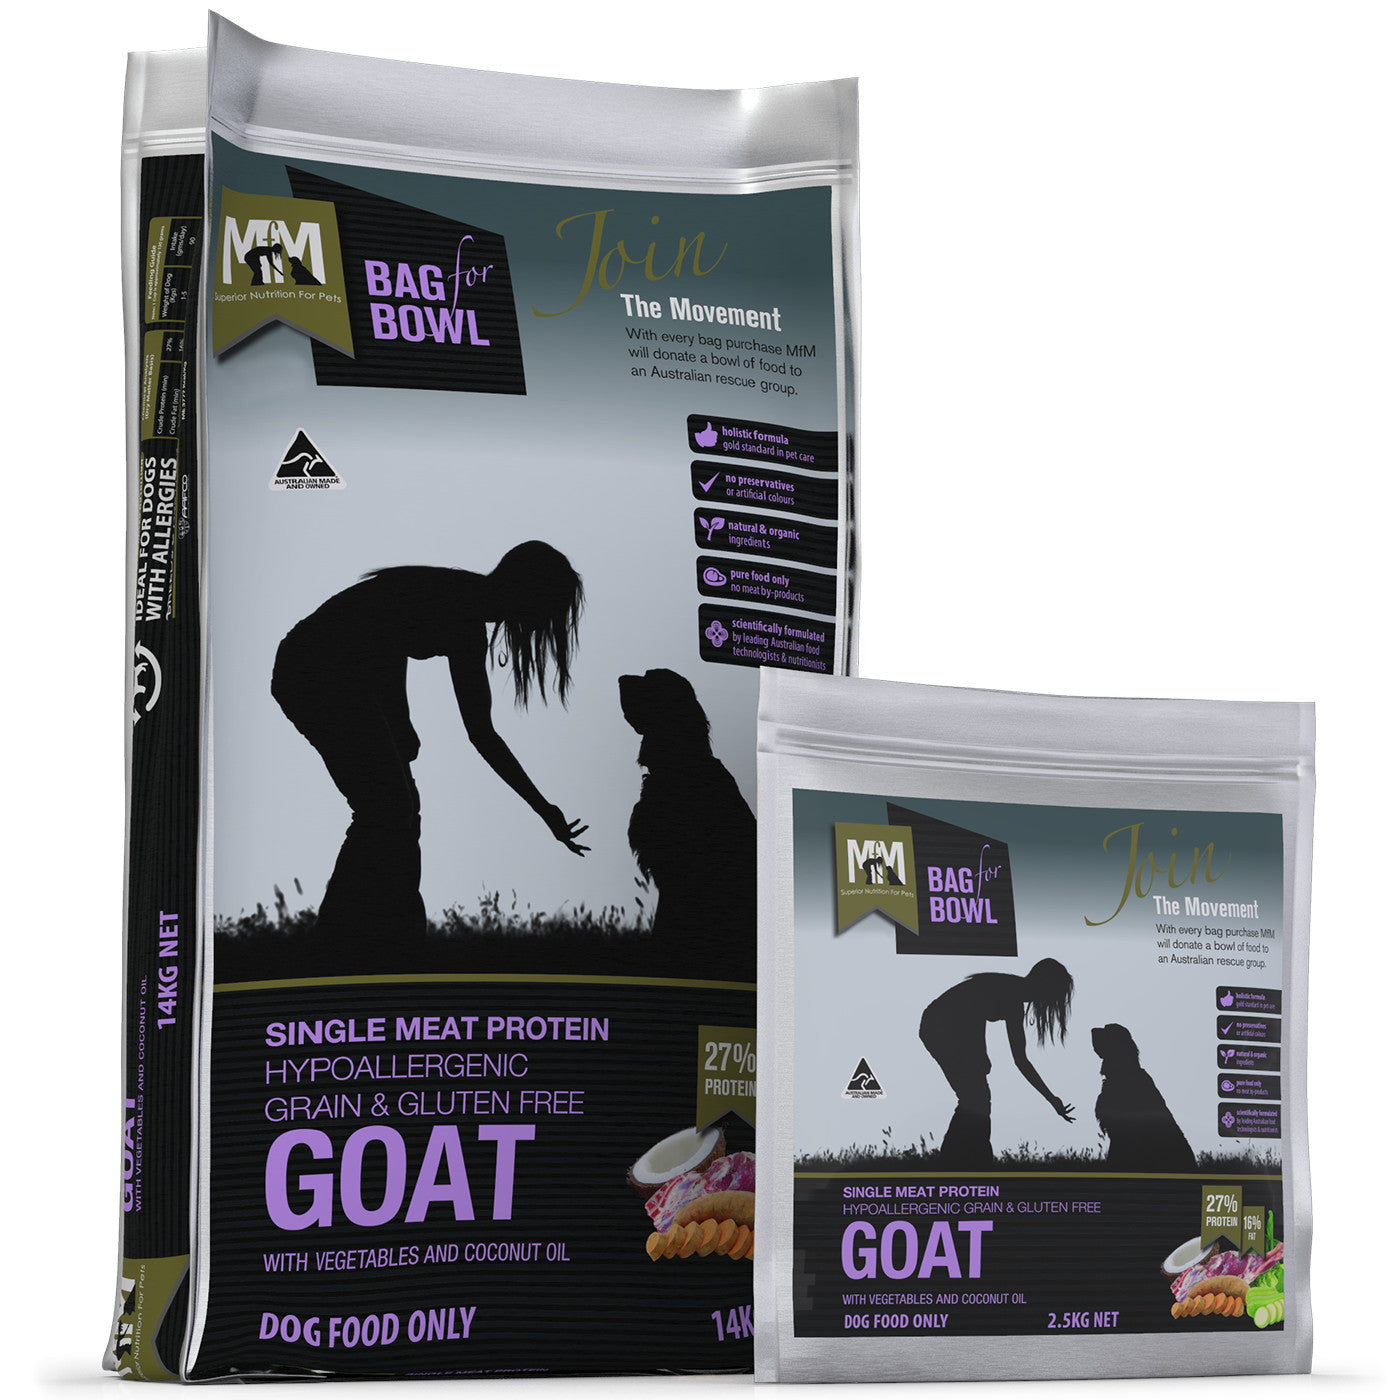 Meals for Mutts Goat Single Meat Protein Dog Food.